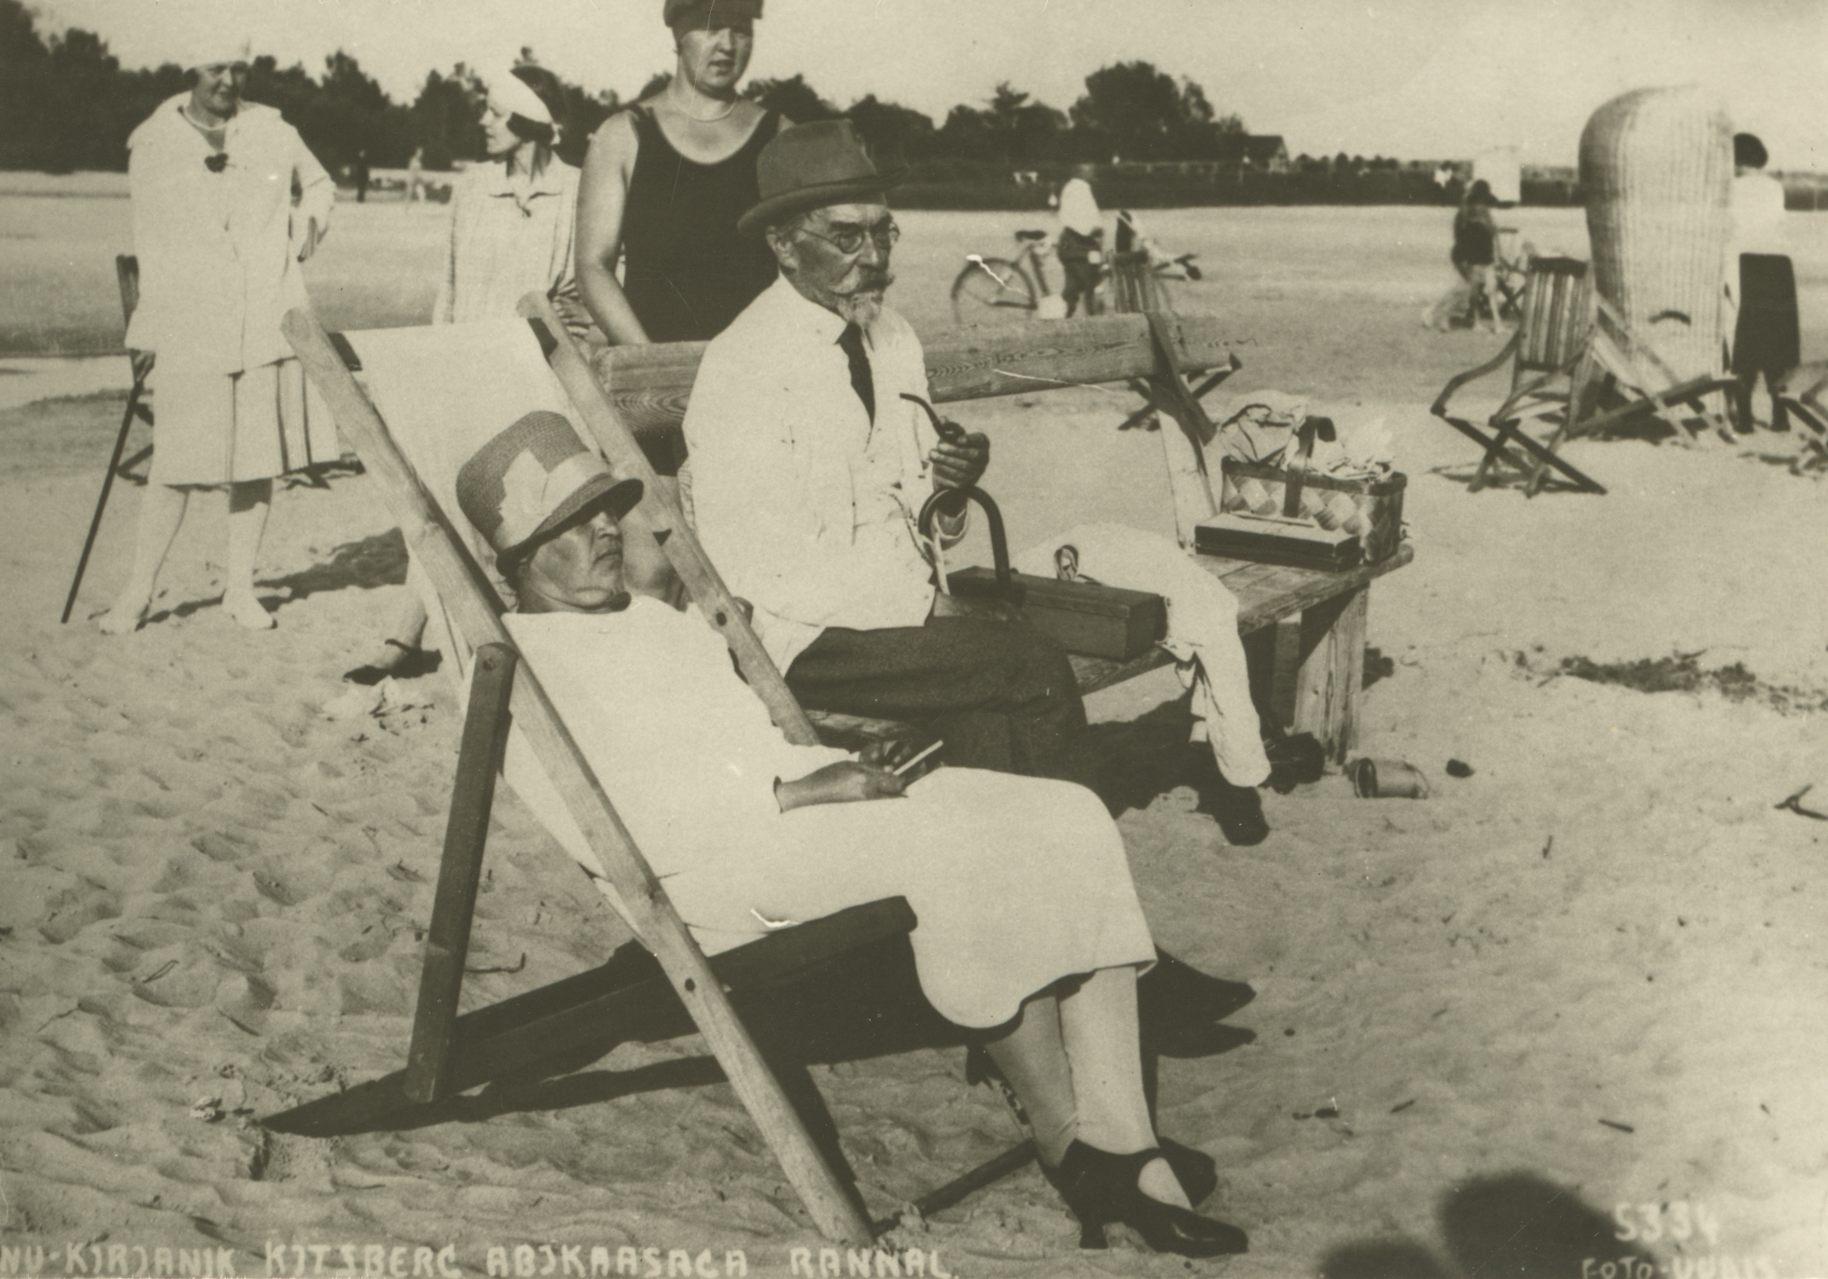 A. Kitzberg's wife is welcomed in Pärnu in the summer of 1927